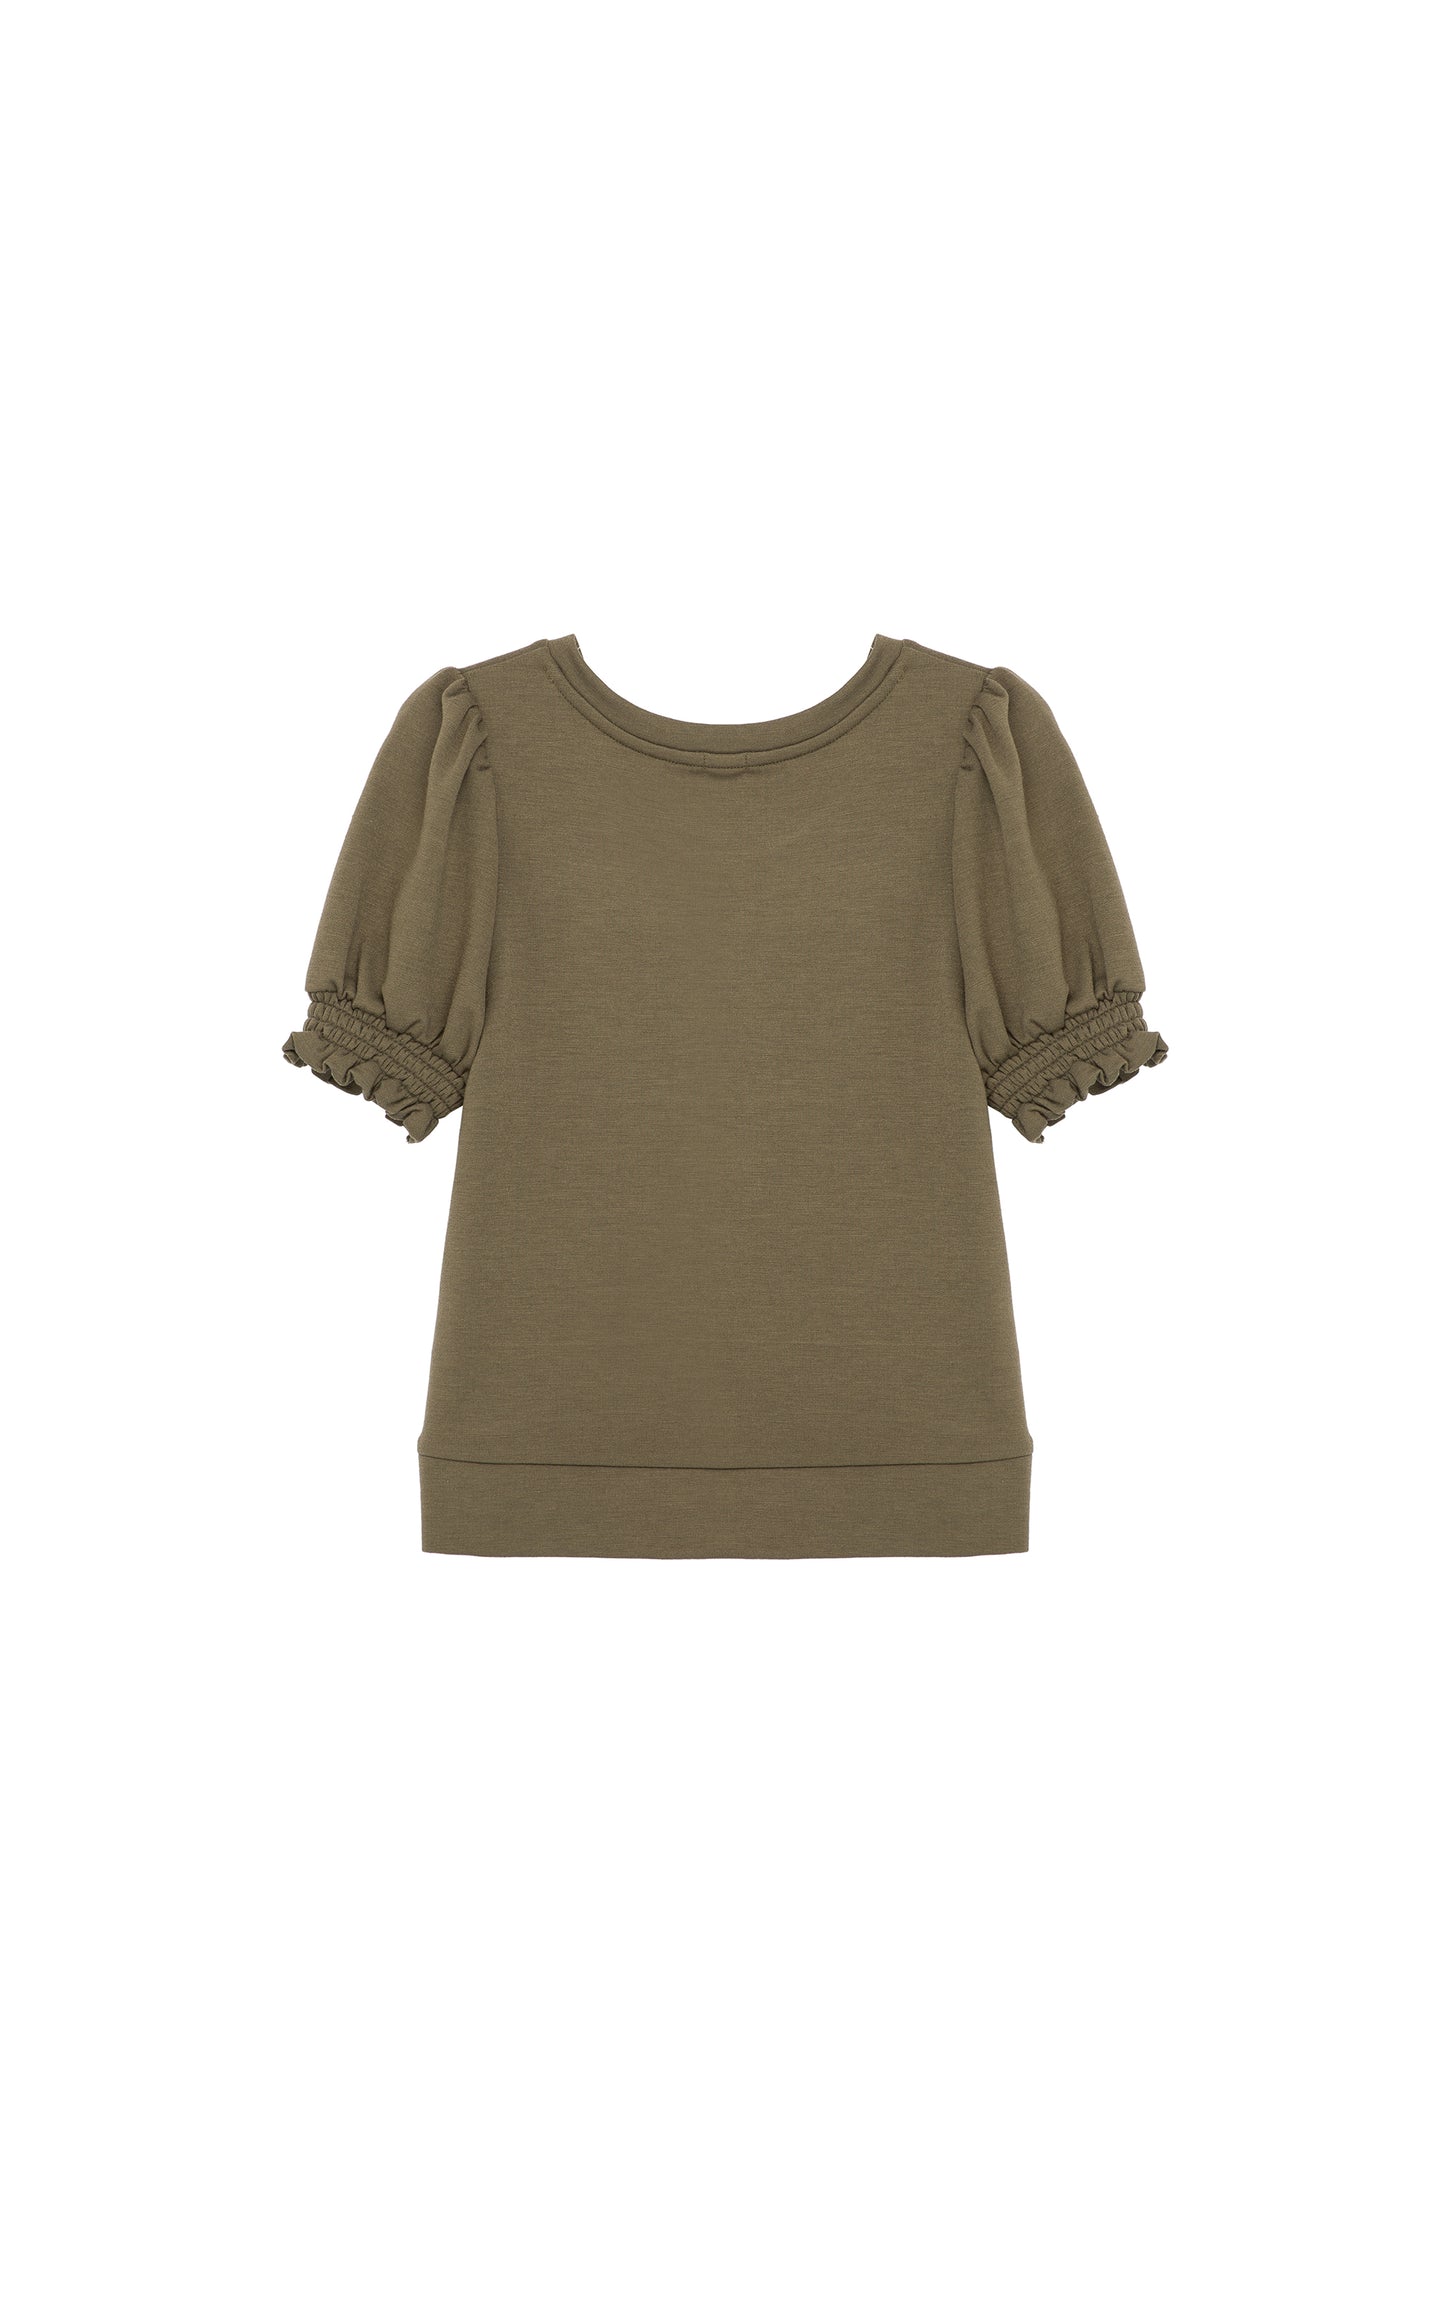 BACK OF BROWN SHORT SLEEVE KNIT TOP WITH PUFFY AND SMOCKED SLEEVES